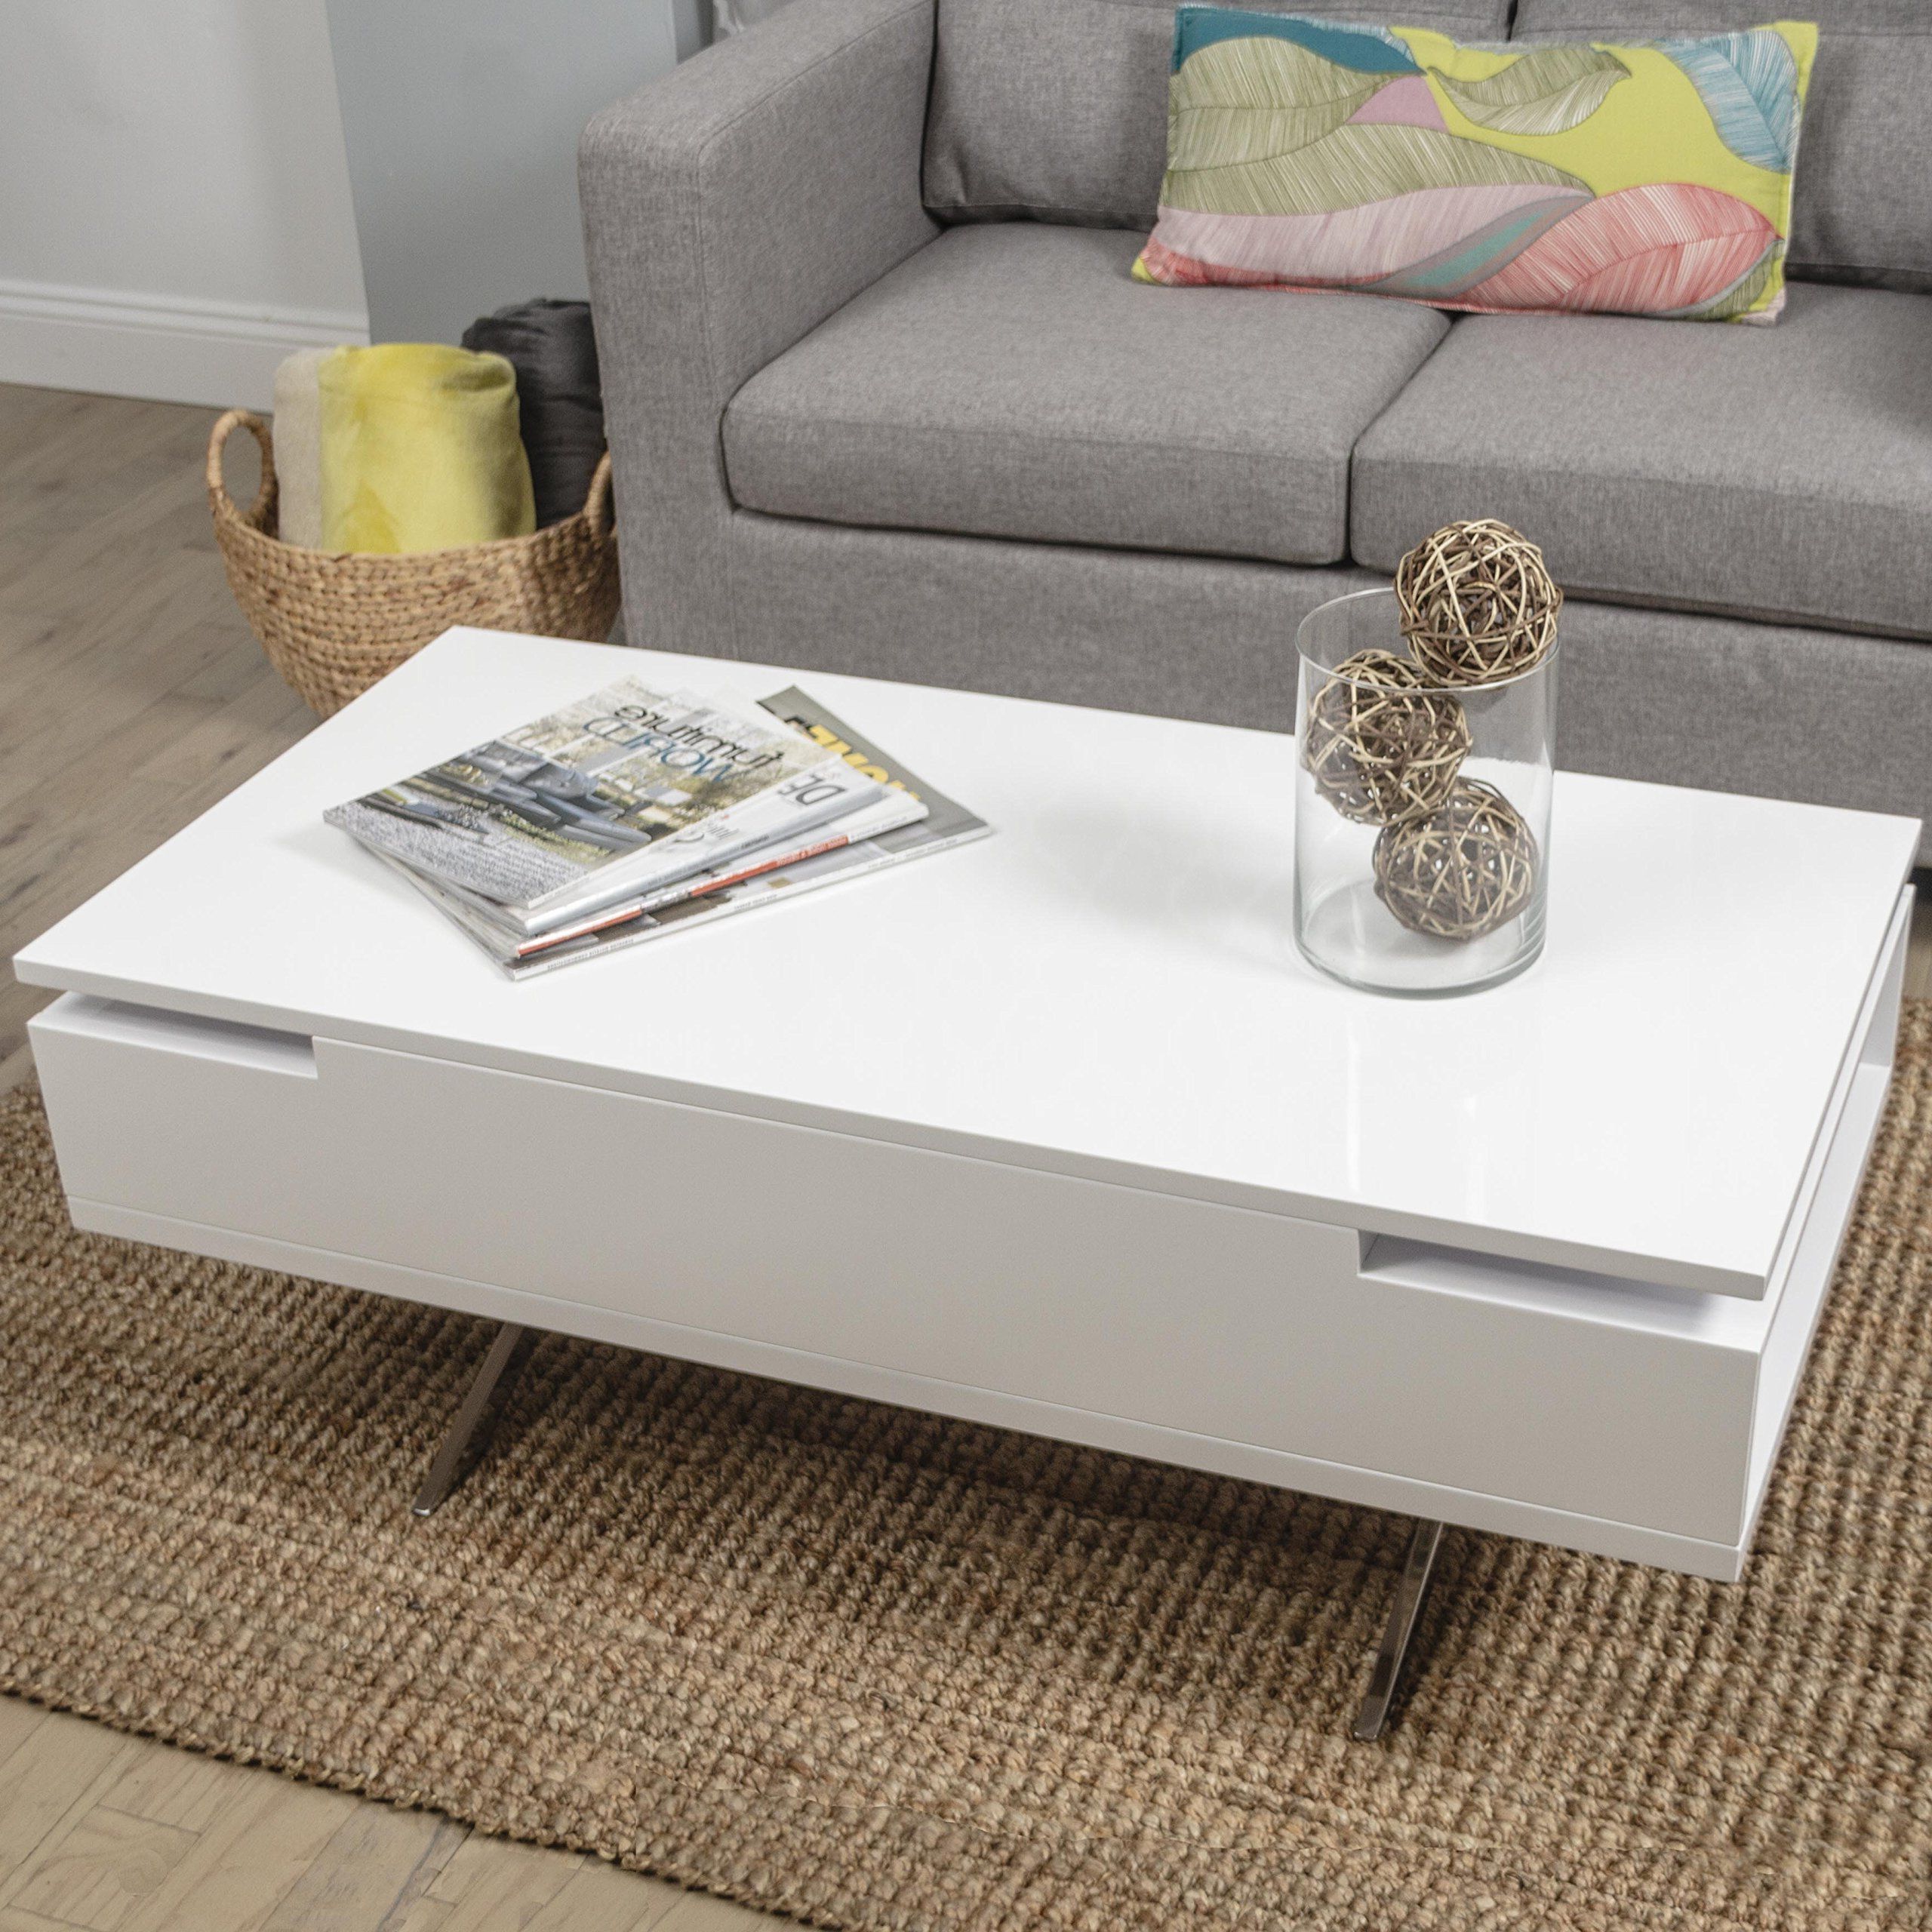 2019 Mix High Gloss Lacquer Wood Stainless Steel Legs White Lifttop Within High Gloss Lift Top Coffee Tables (Photo 1 of 15)